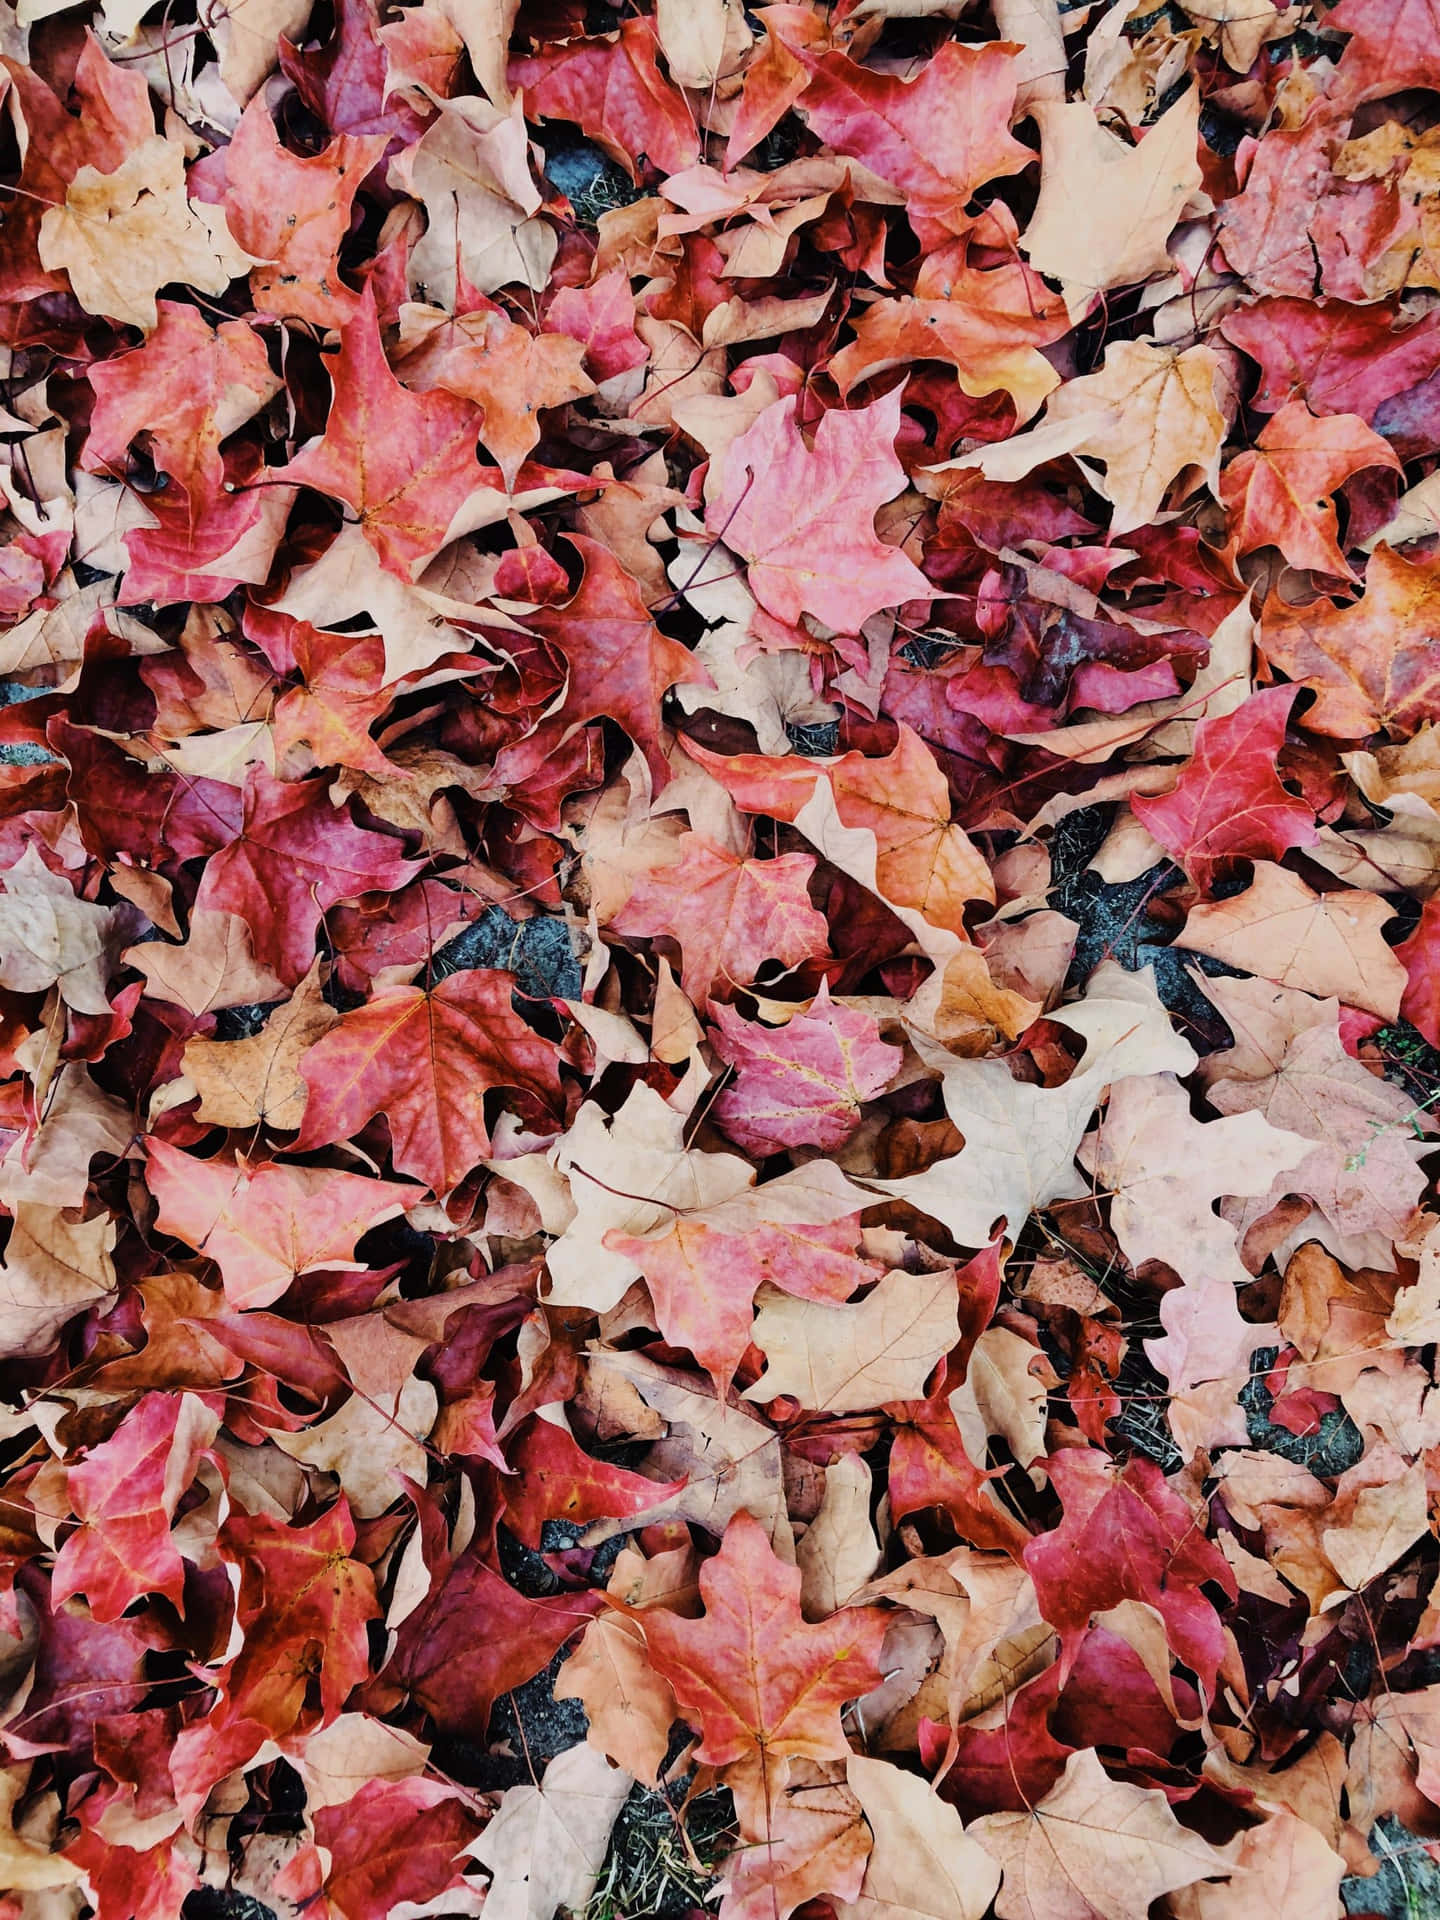 Splashes of pink punctuate this scenic fall landscape. Wallpaper